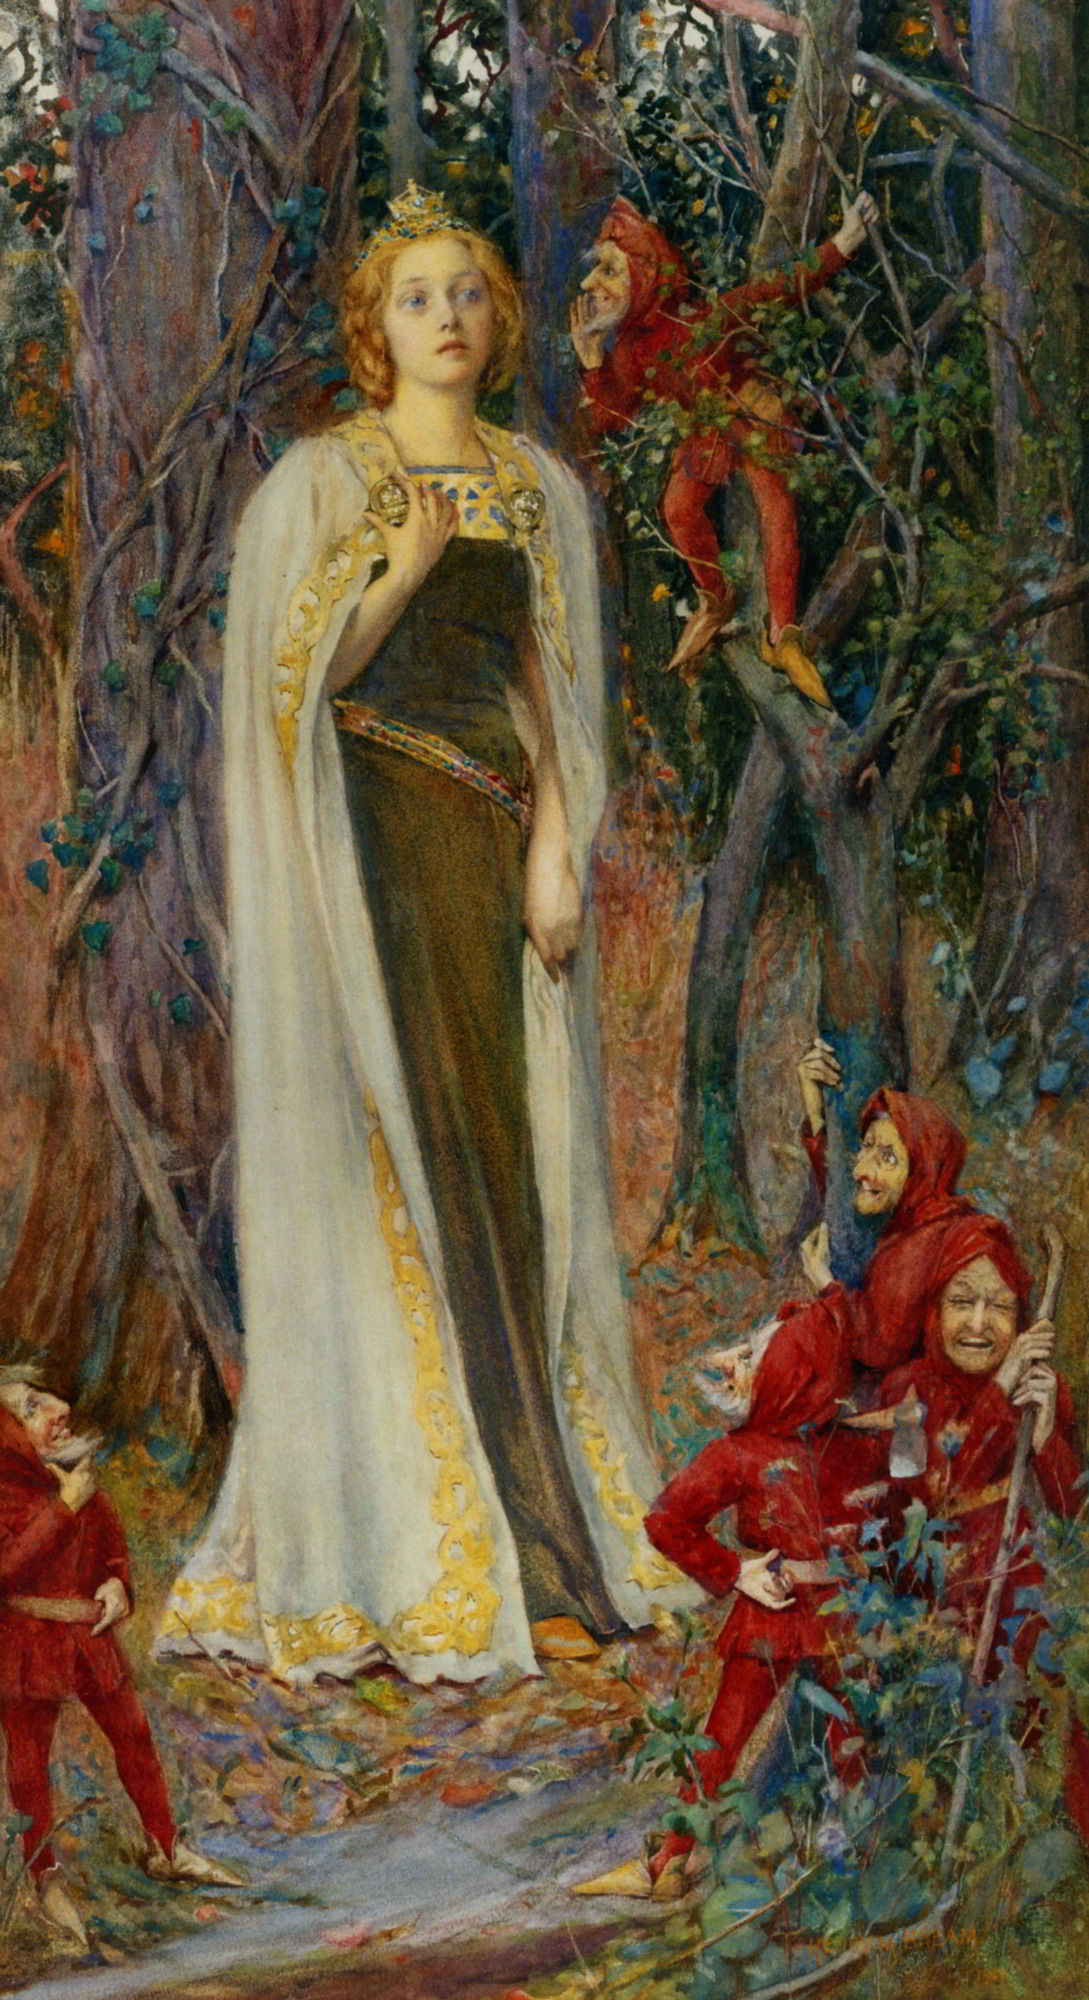 Snow White by Henry Meynell Rheam